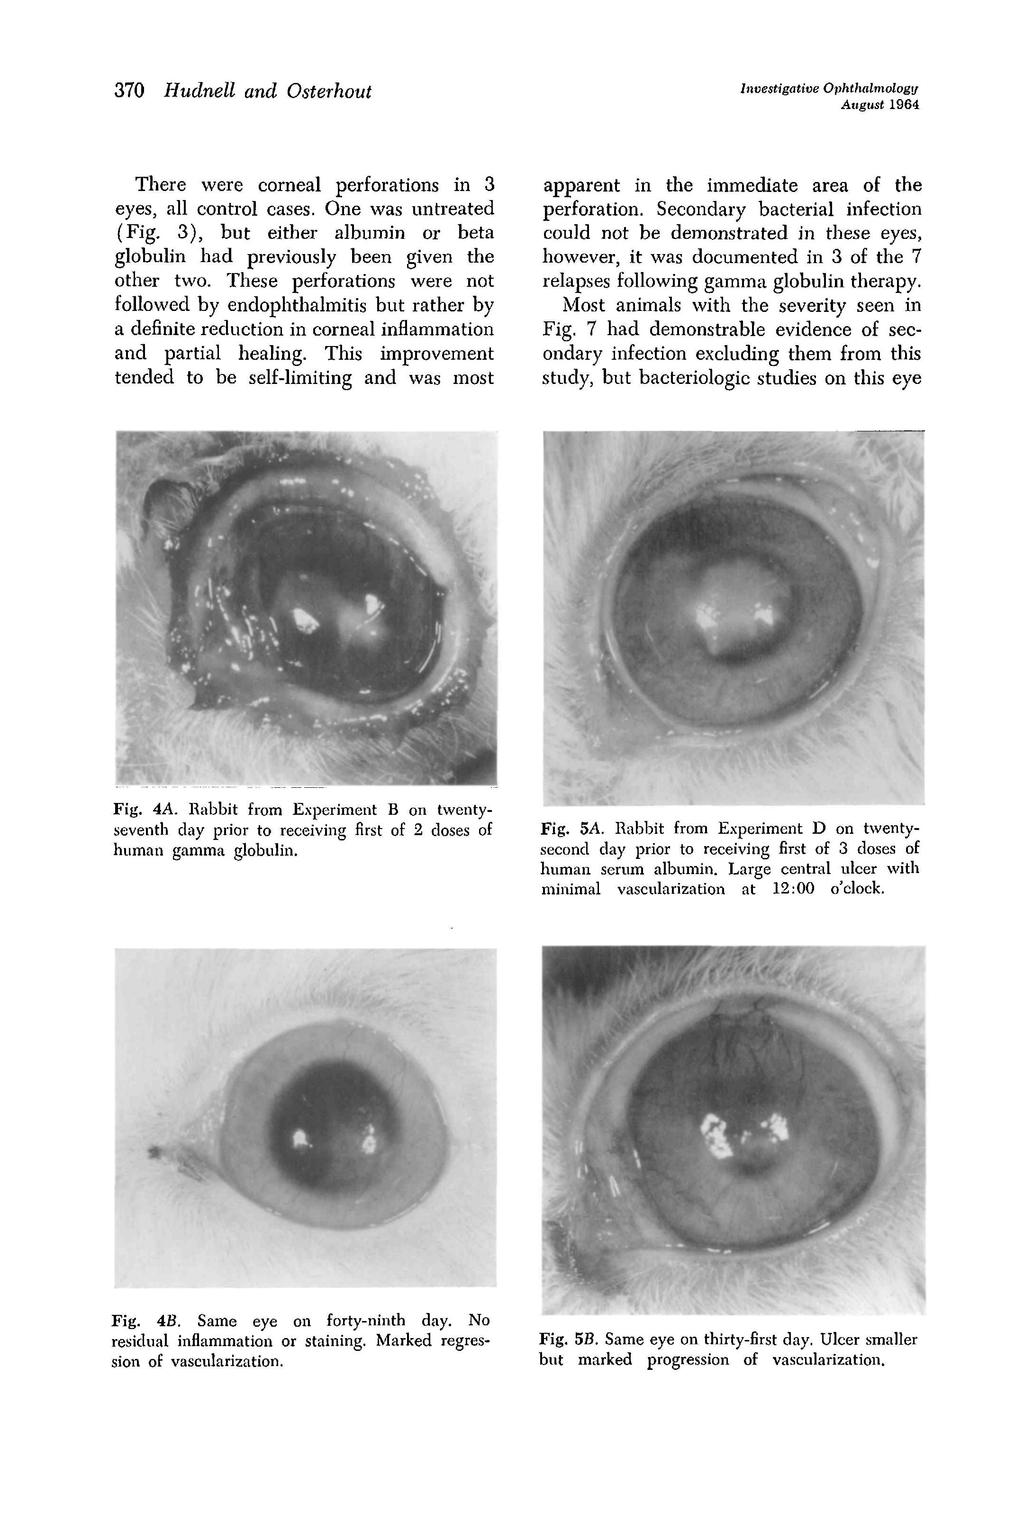 7 Hudnell and Osterhout Investigative Ophthalmology August 96 There were corneal perforations in eyes, all control cases. One was untreated (Fig.